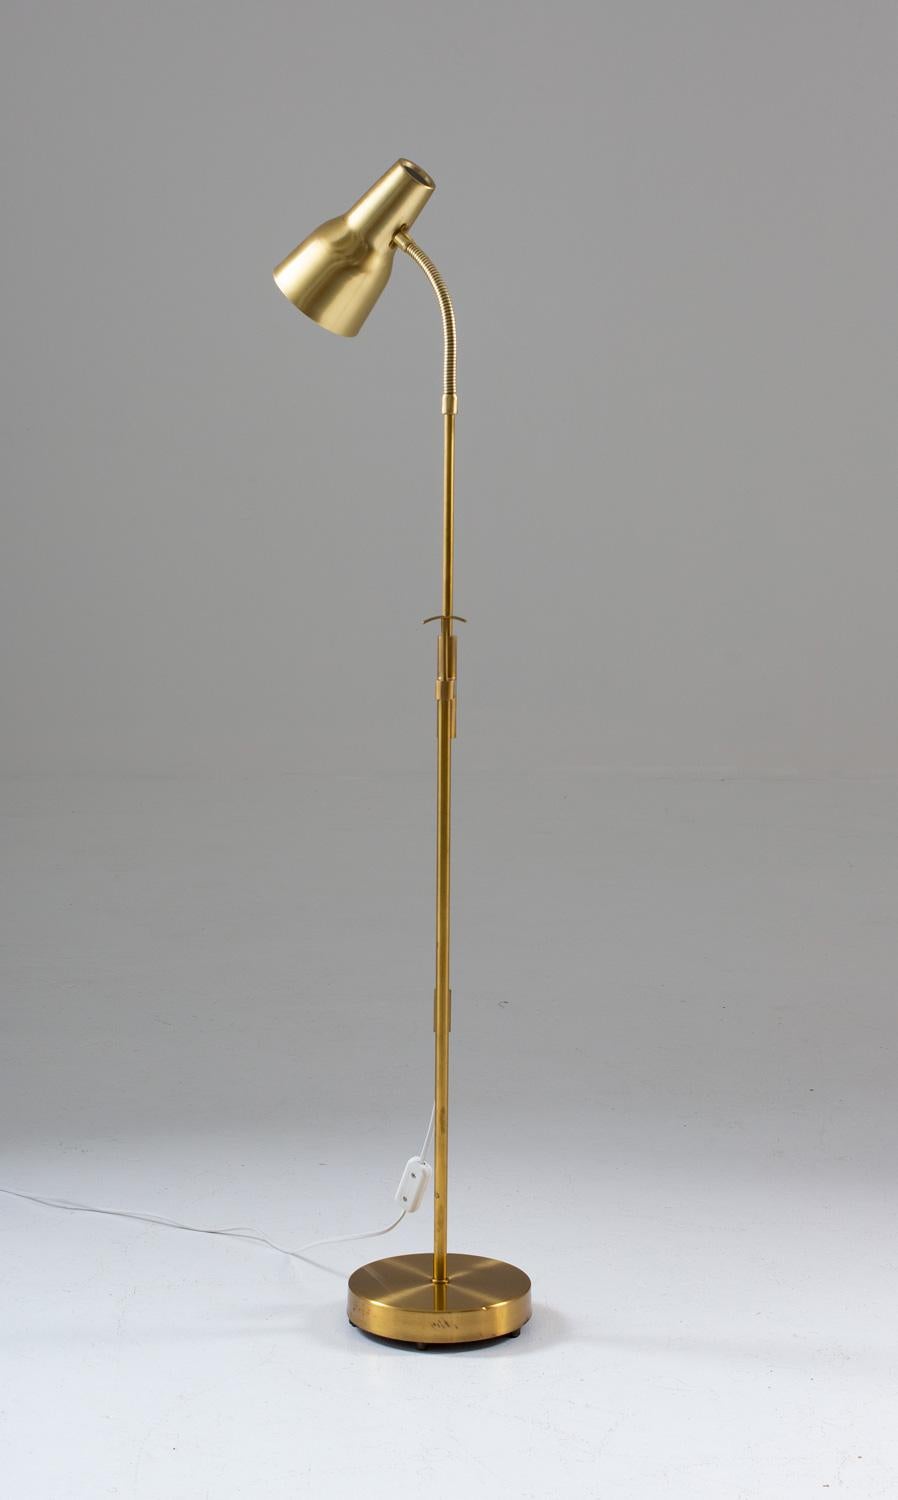 Lovely floor lamp in brass, by Swedish manufacturer Falkenbergs, Sweden. 
The lamp is adjustable in both height and angle, making it a perfect reading lamp beside the sofa. 
Condition: Very good original condition with light patina.